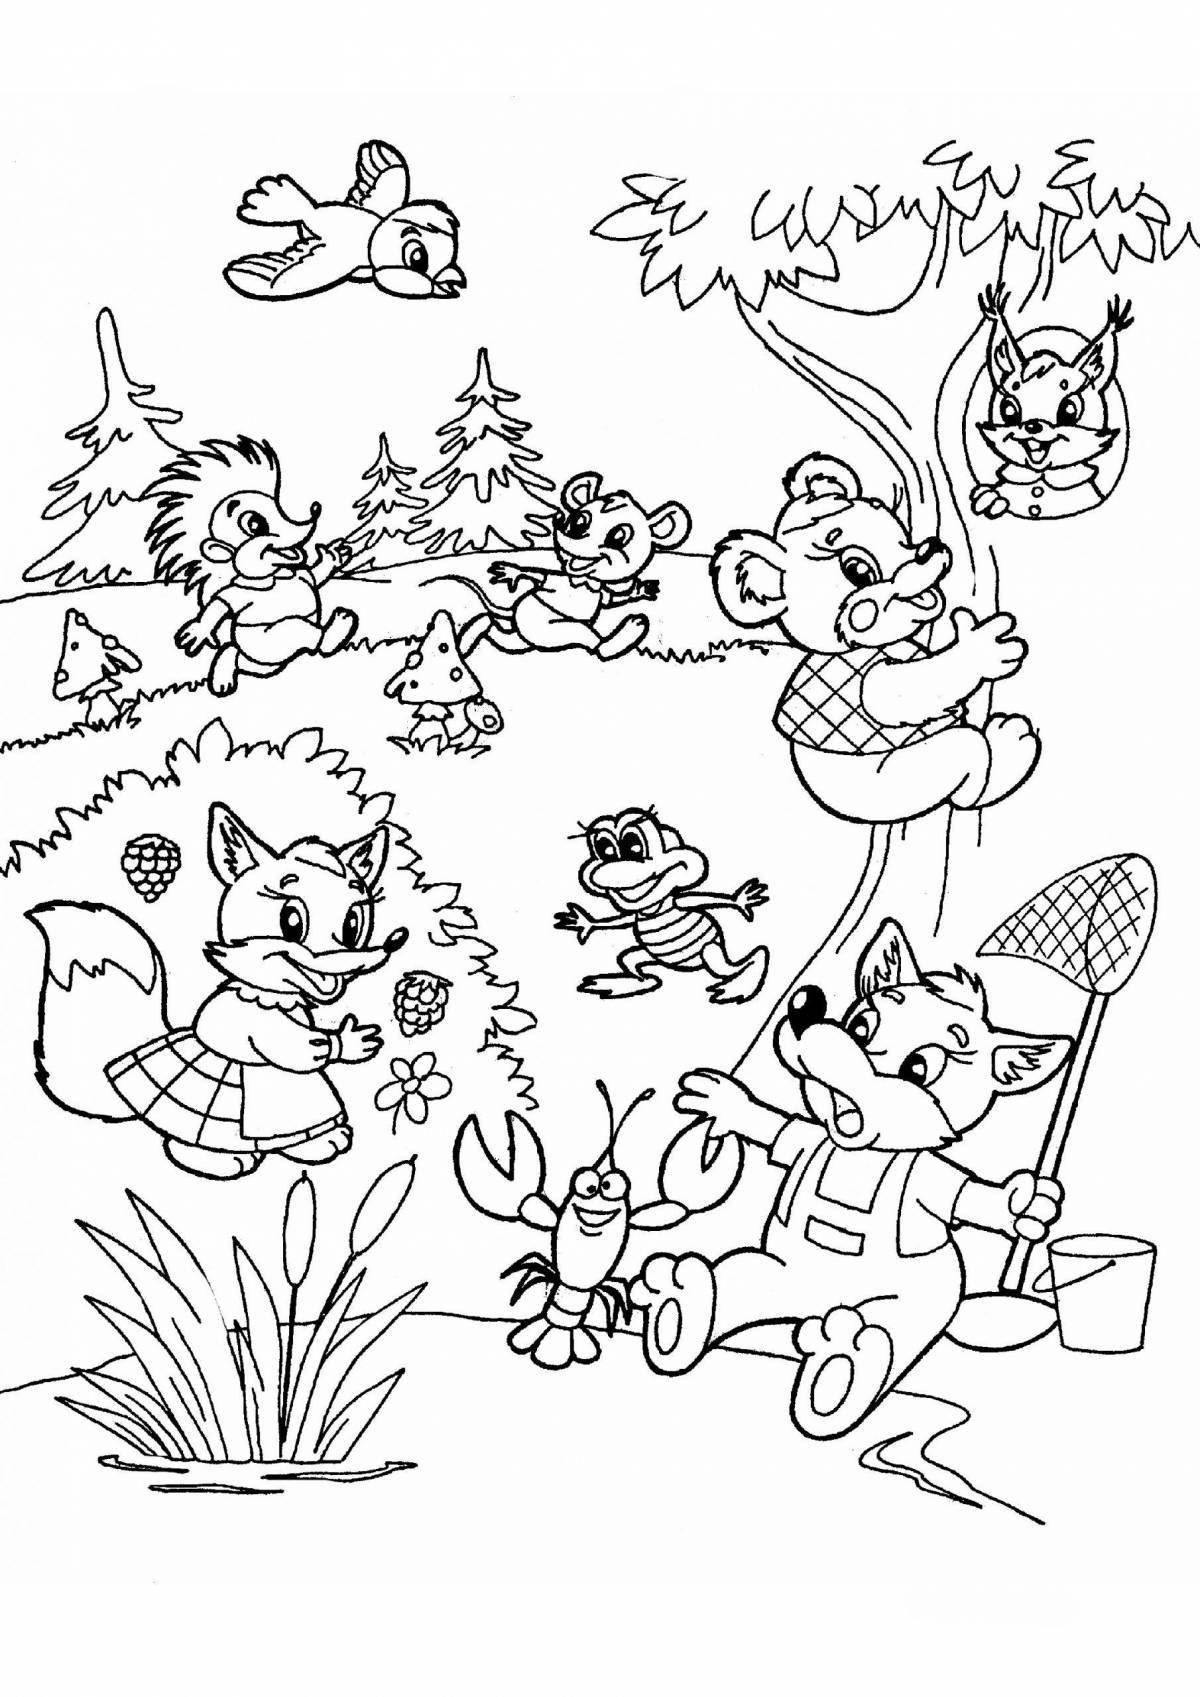 Coloring forest animals for kids